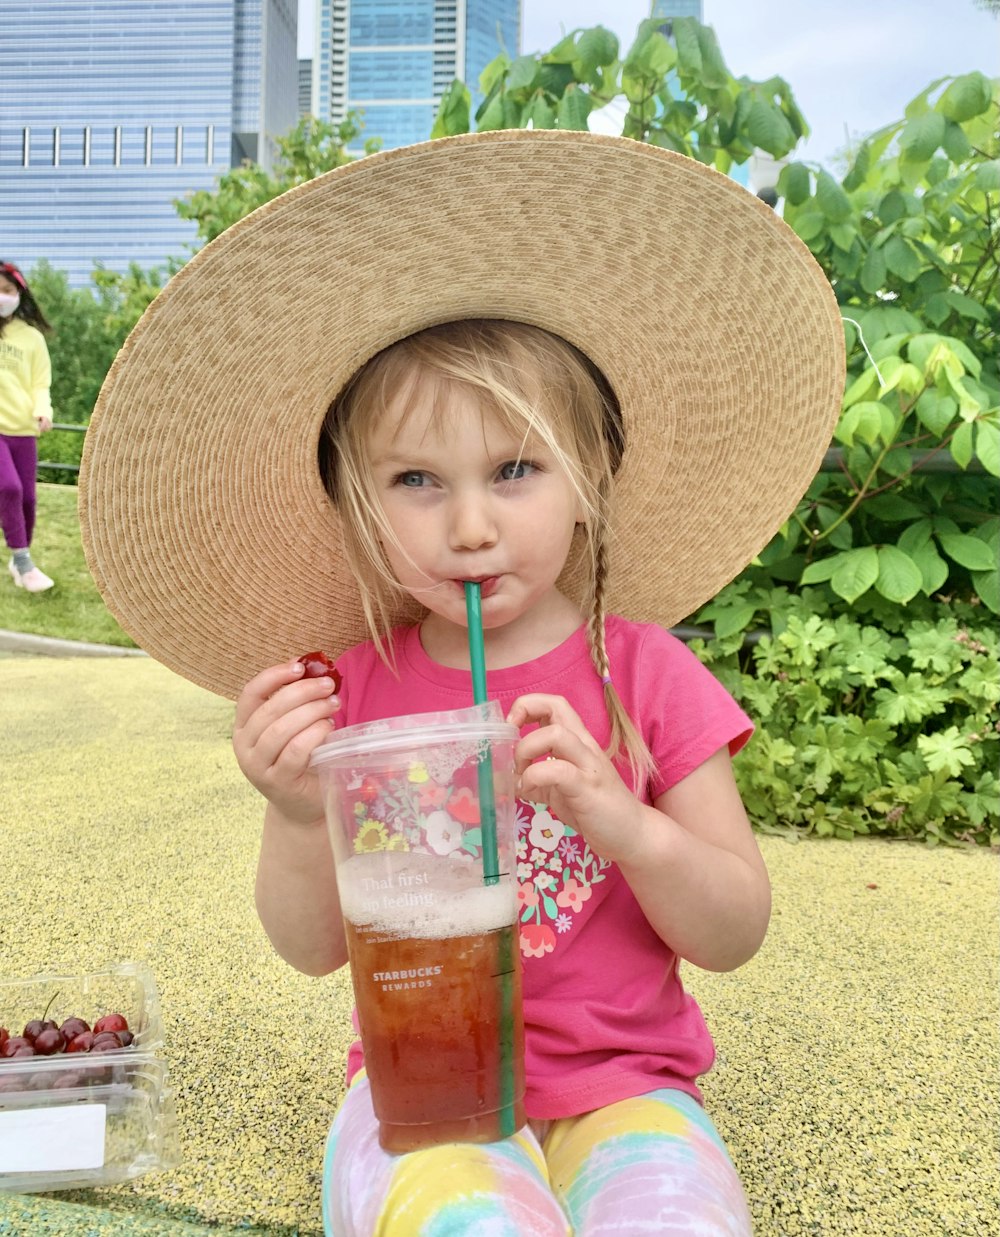 girl in pink shirt holding clear plastic cup with straw